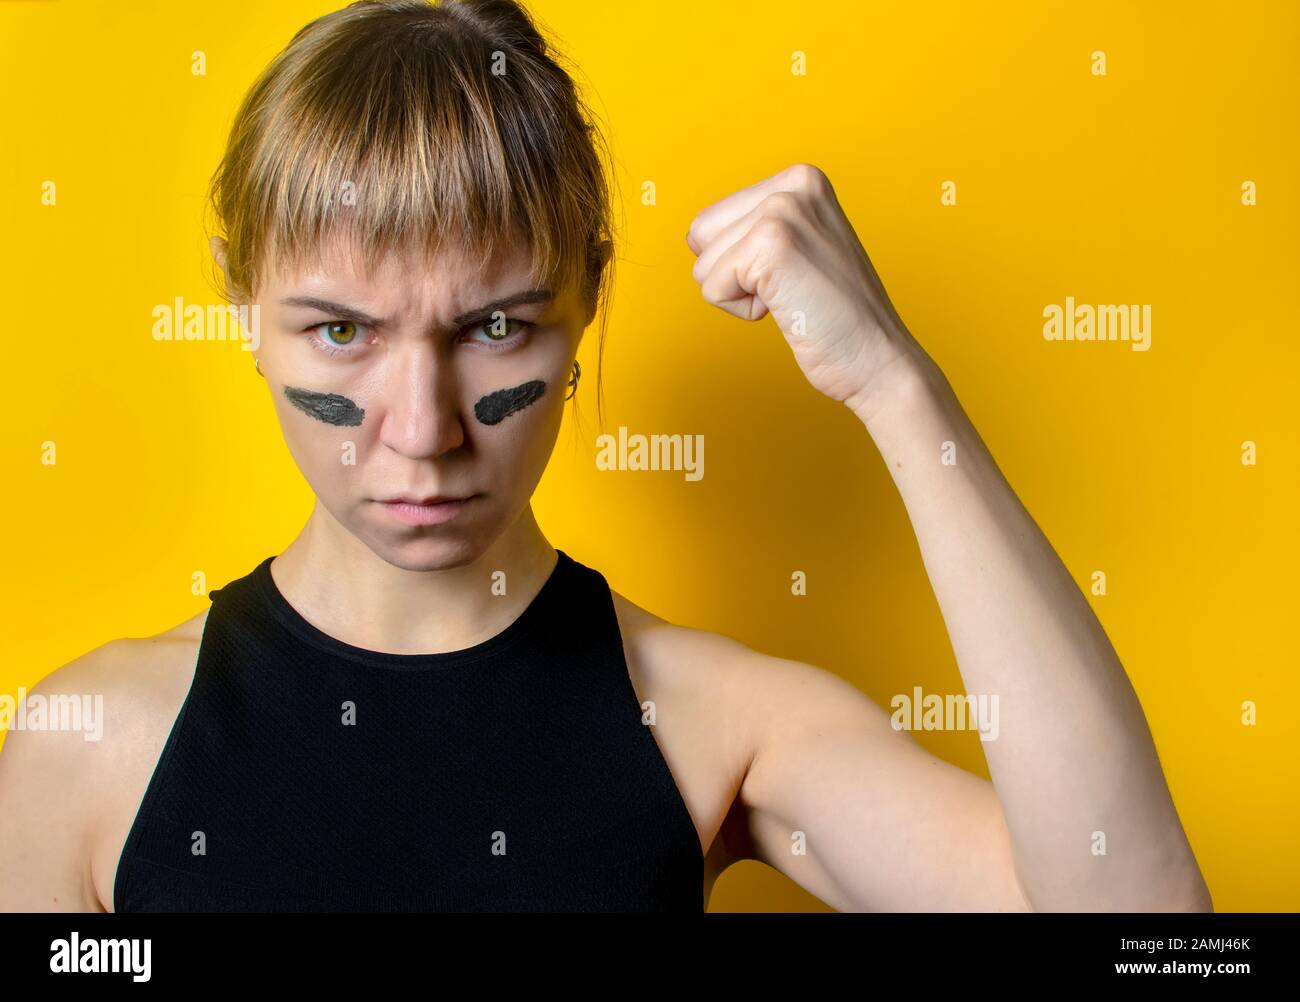 a woman with camouflage on her face on a yellow background shows a fist. feminism concept Stock Photo